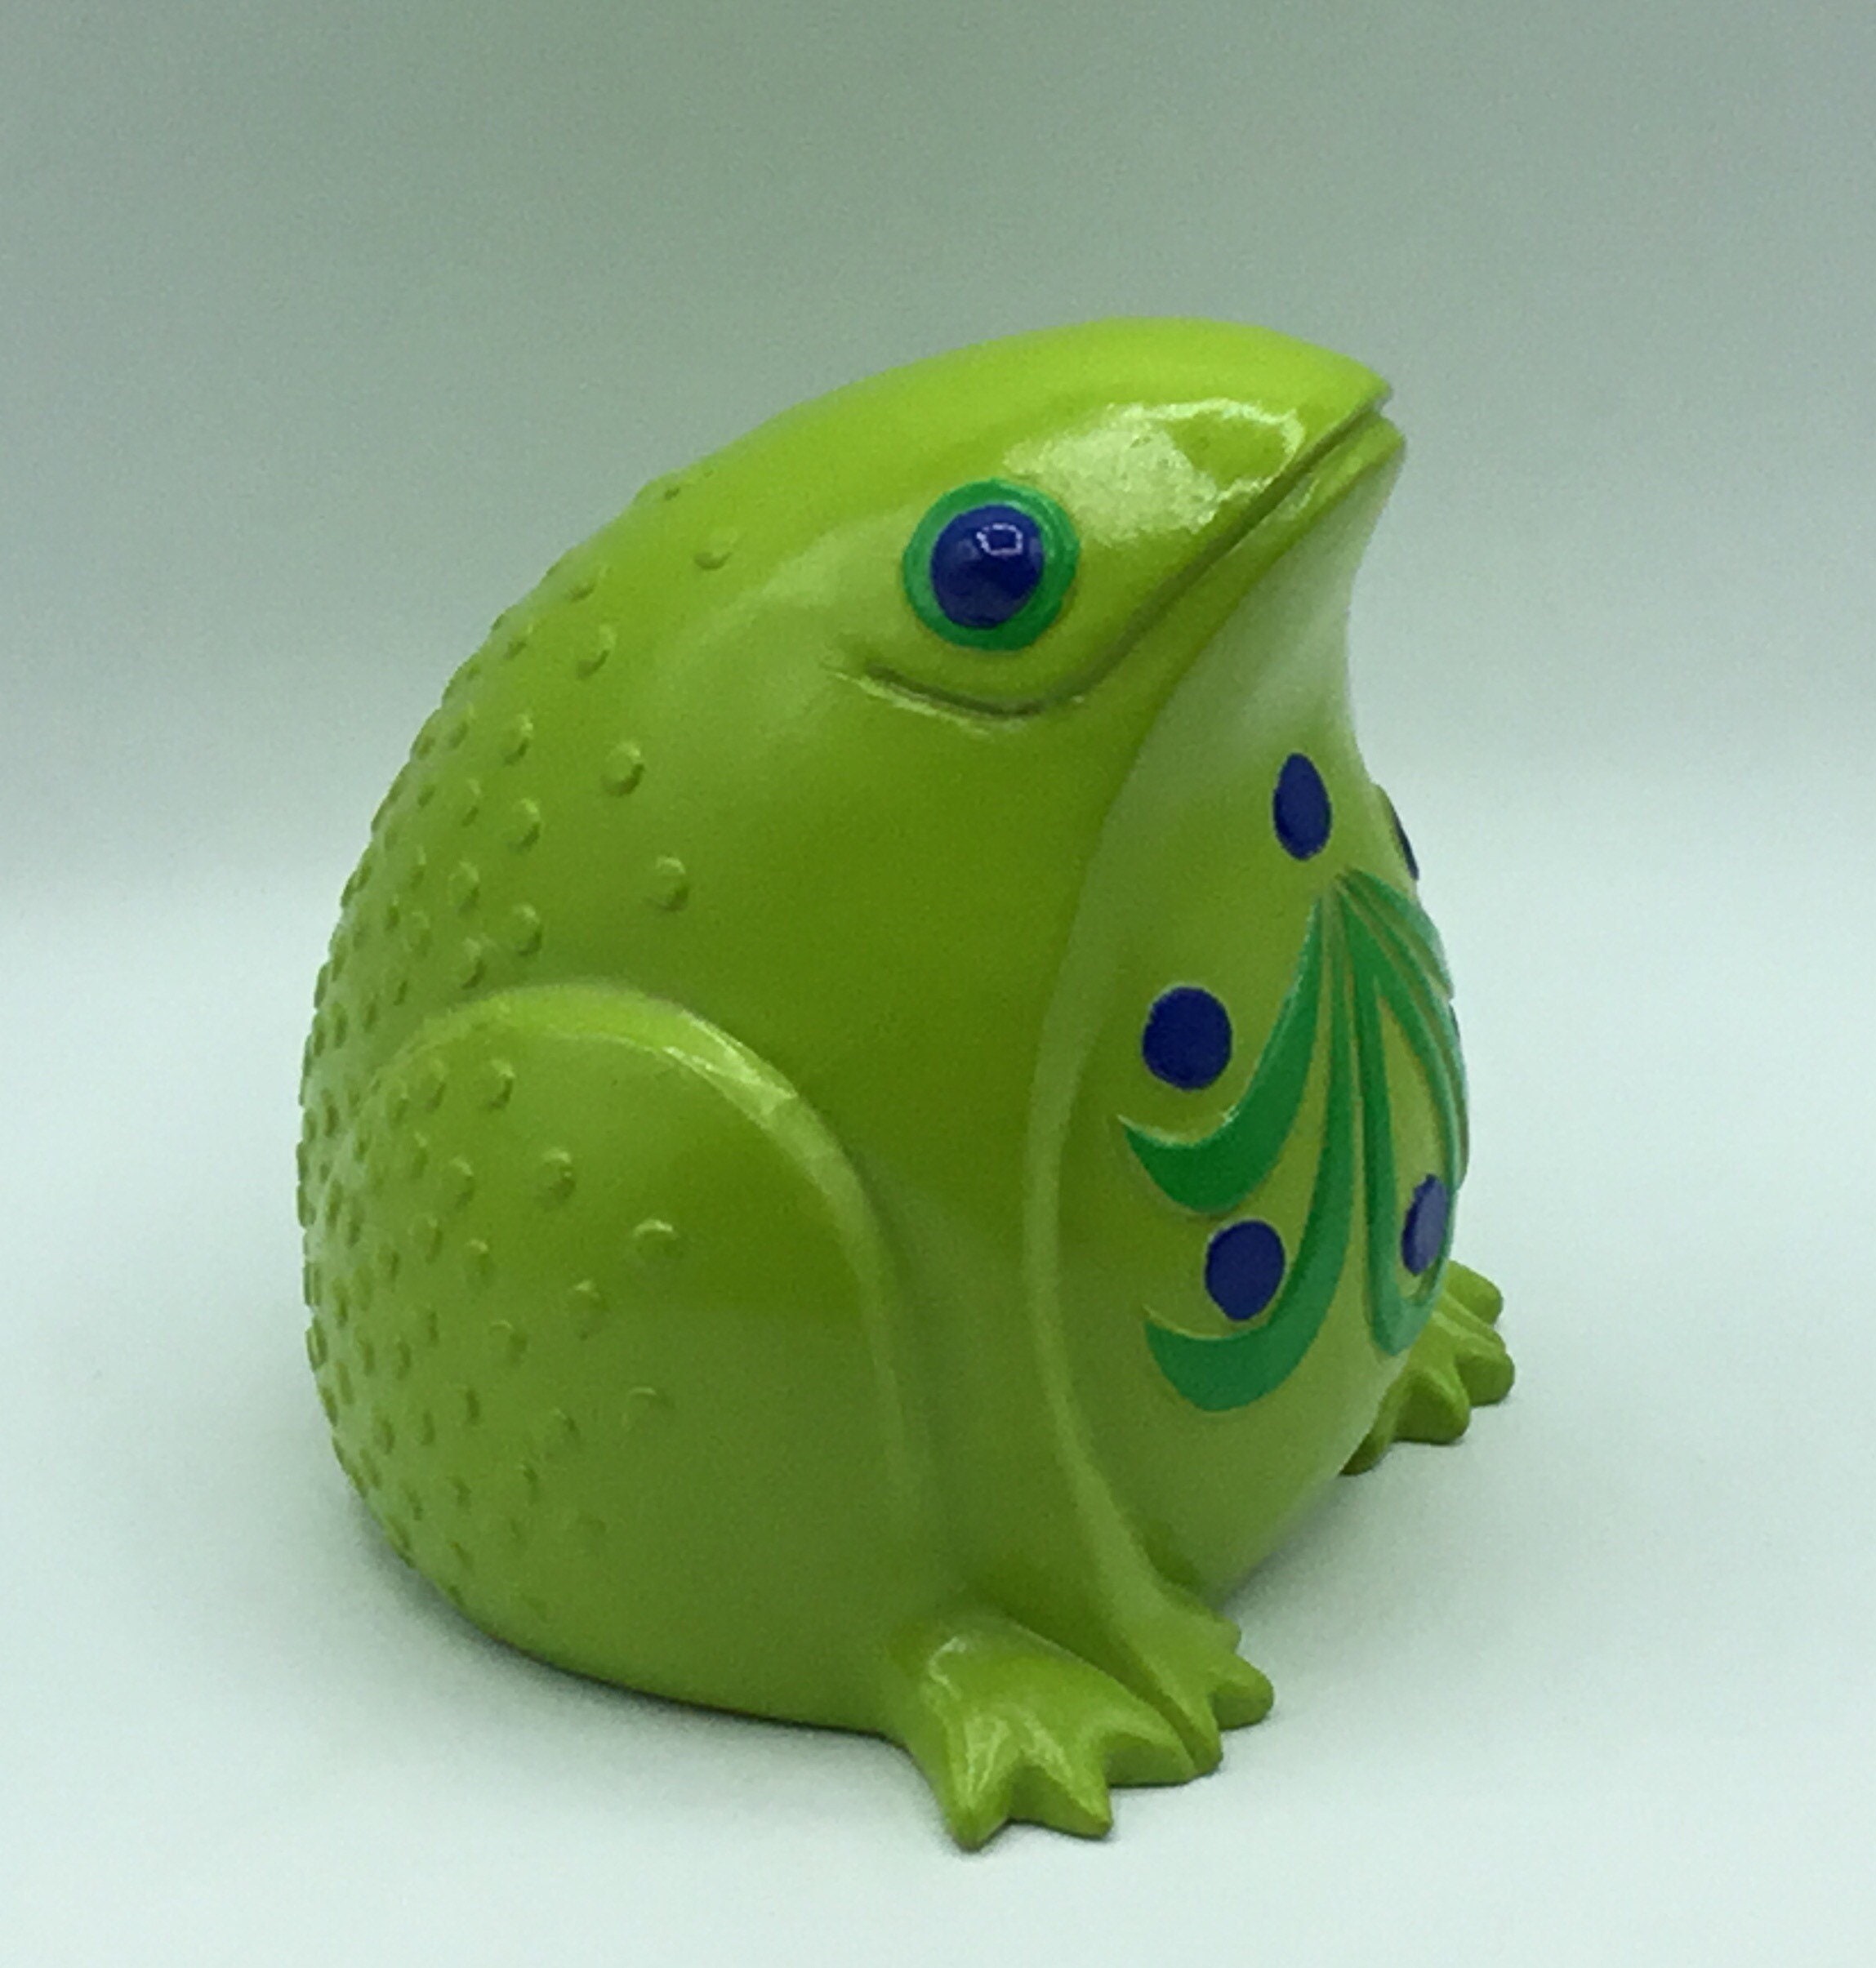 Mod Fitz and Floyd Chalkware Kitschy Frog Bank - Etsy